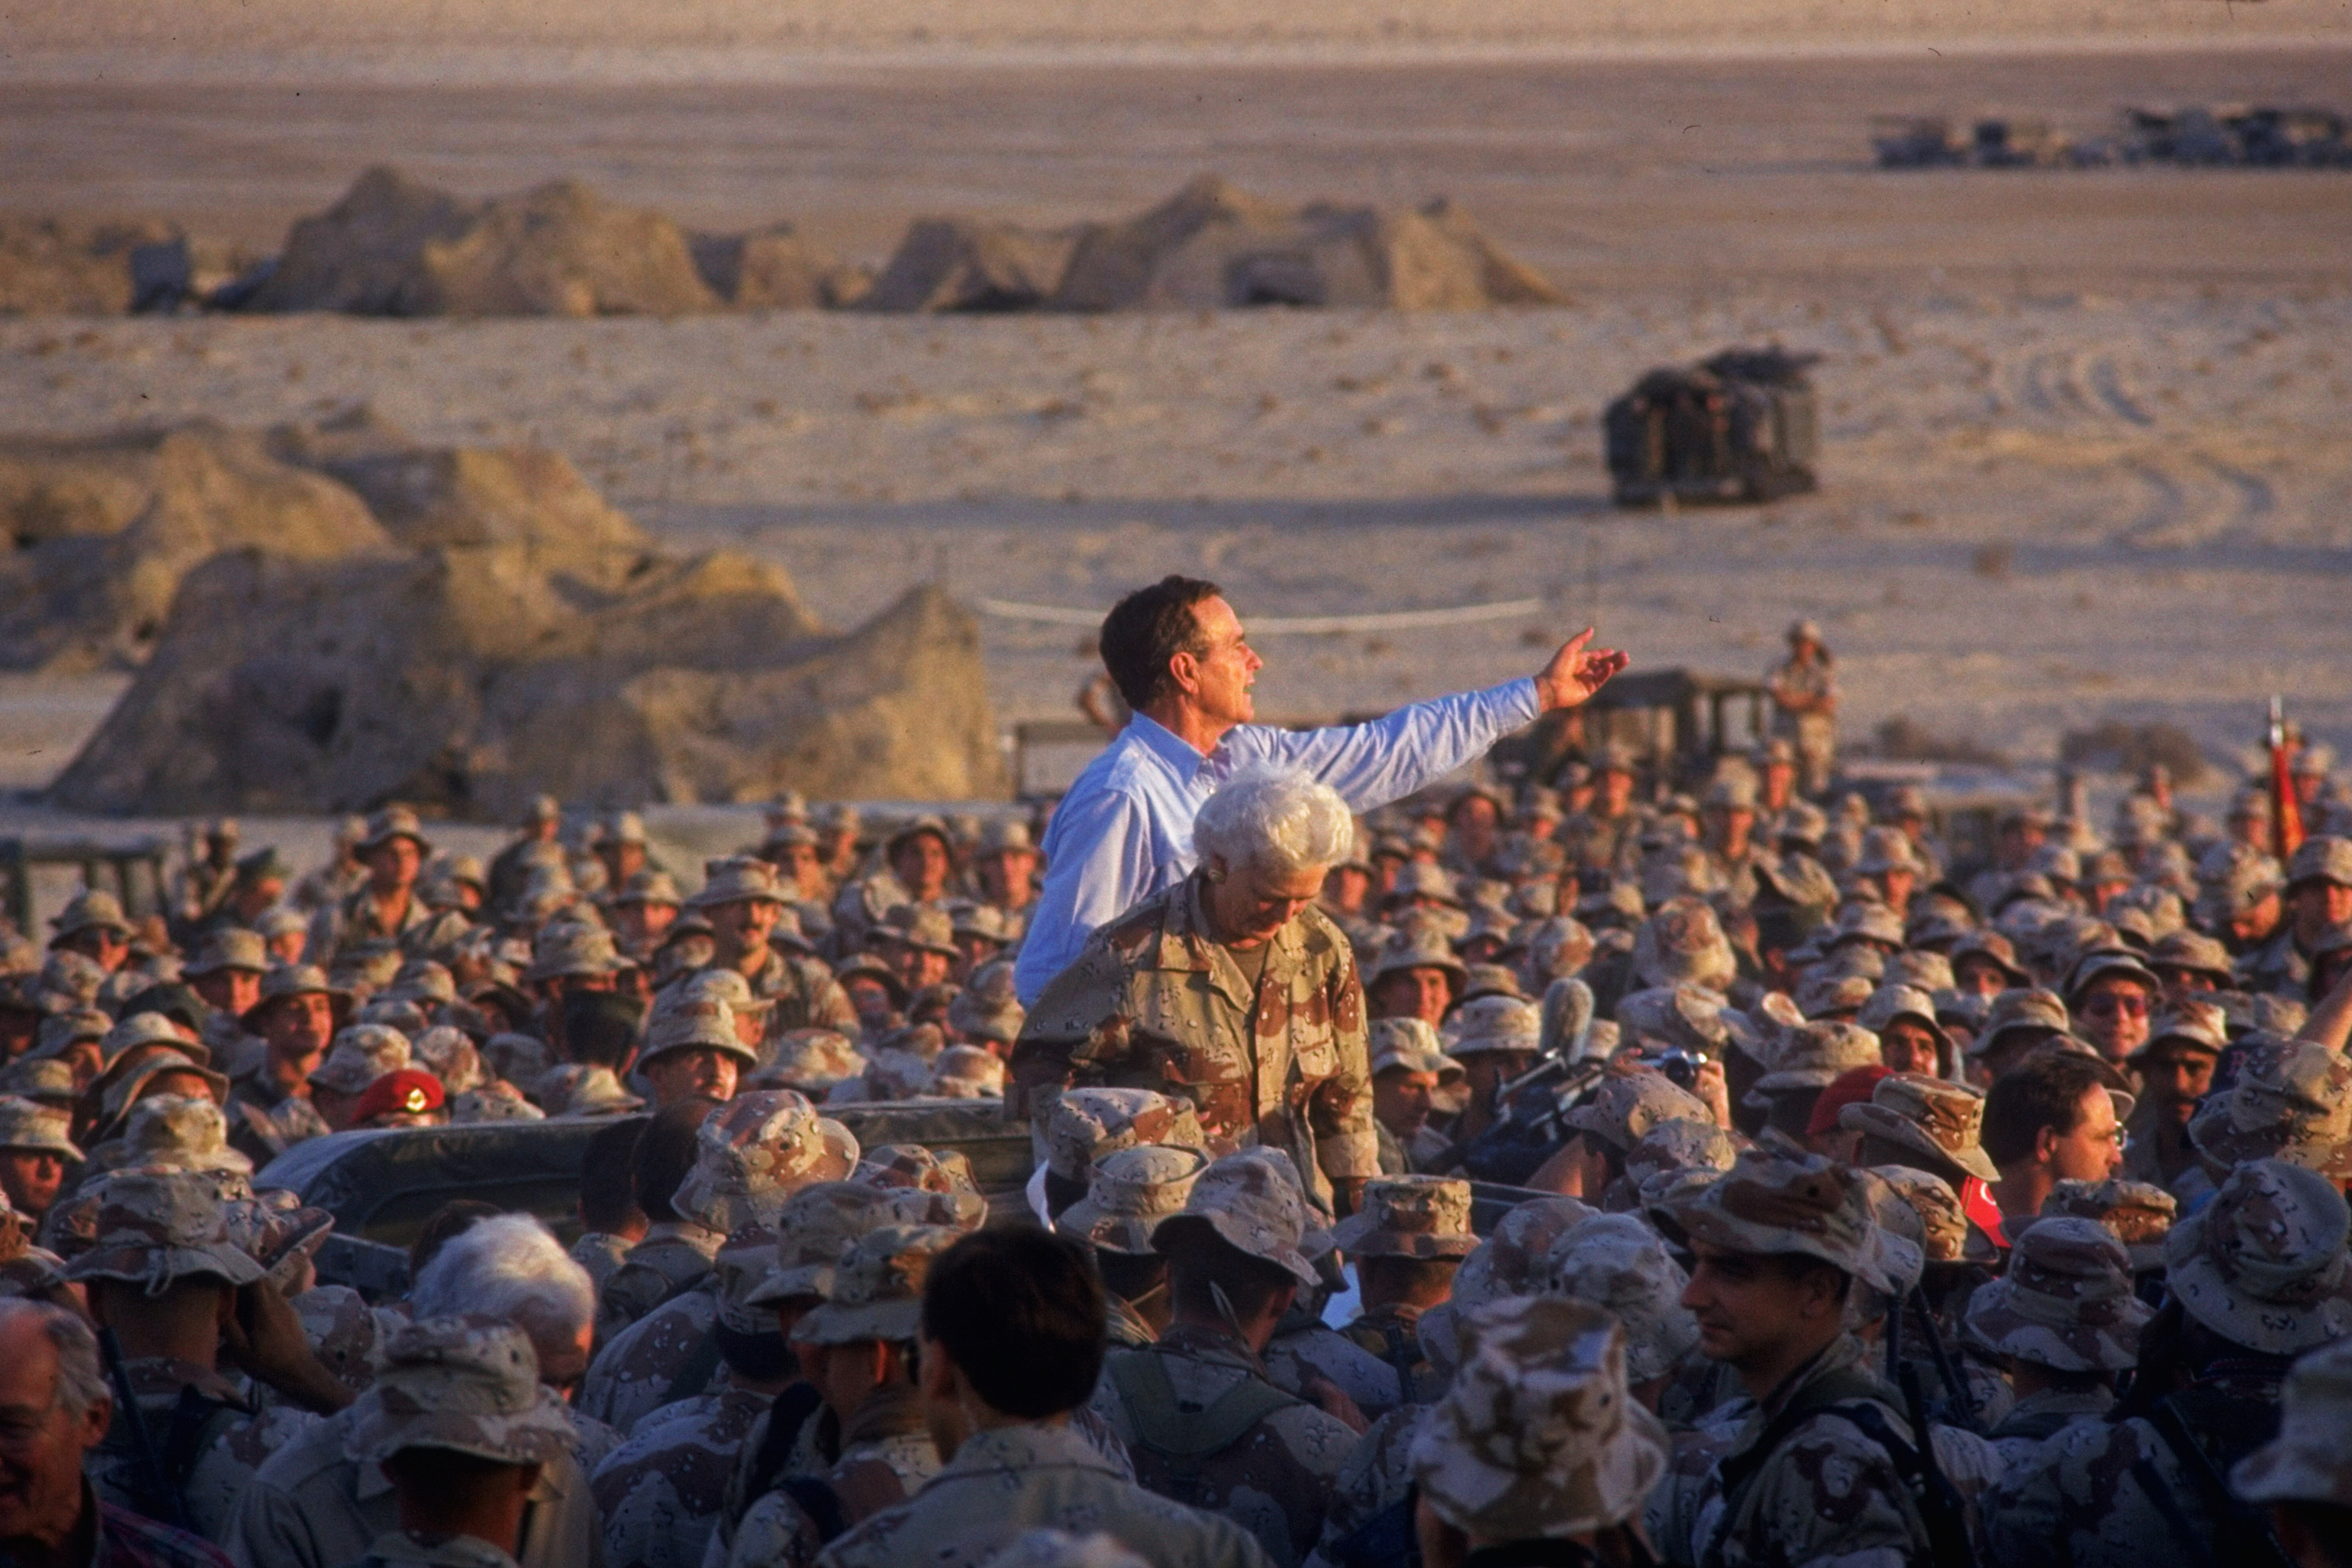 After Iraq invaded Kuwait, Bush responded by sending troops to the Persian Gulf. In November, he and Barbara visited a Marine Division in Dhahran, Saudi Arabia, above. A few months later, in February 1991, U.S. forces entered Kuwait. The war would turn out to be the most difficult foreign crises for the Bush presidency. (Diana Walker—Time &amp; Life Pictures/Getty Images)